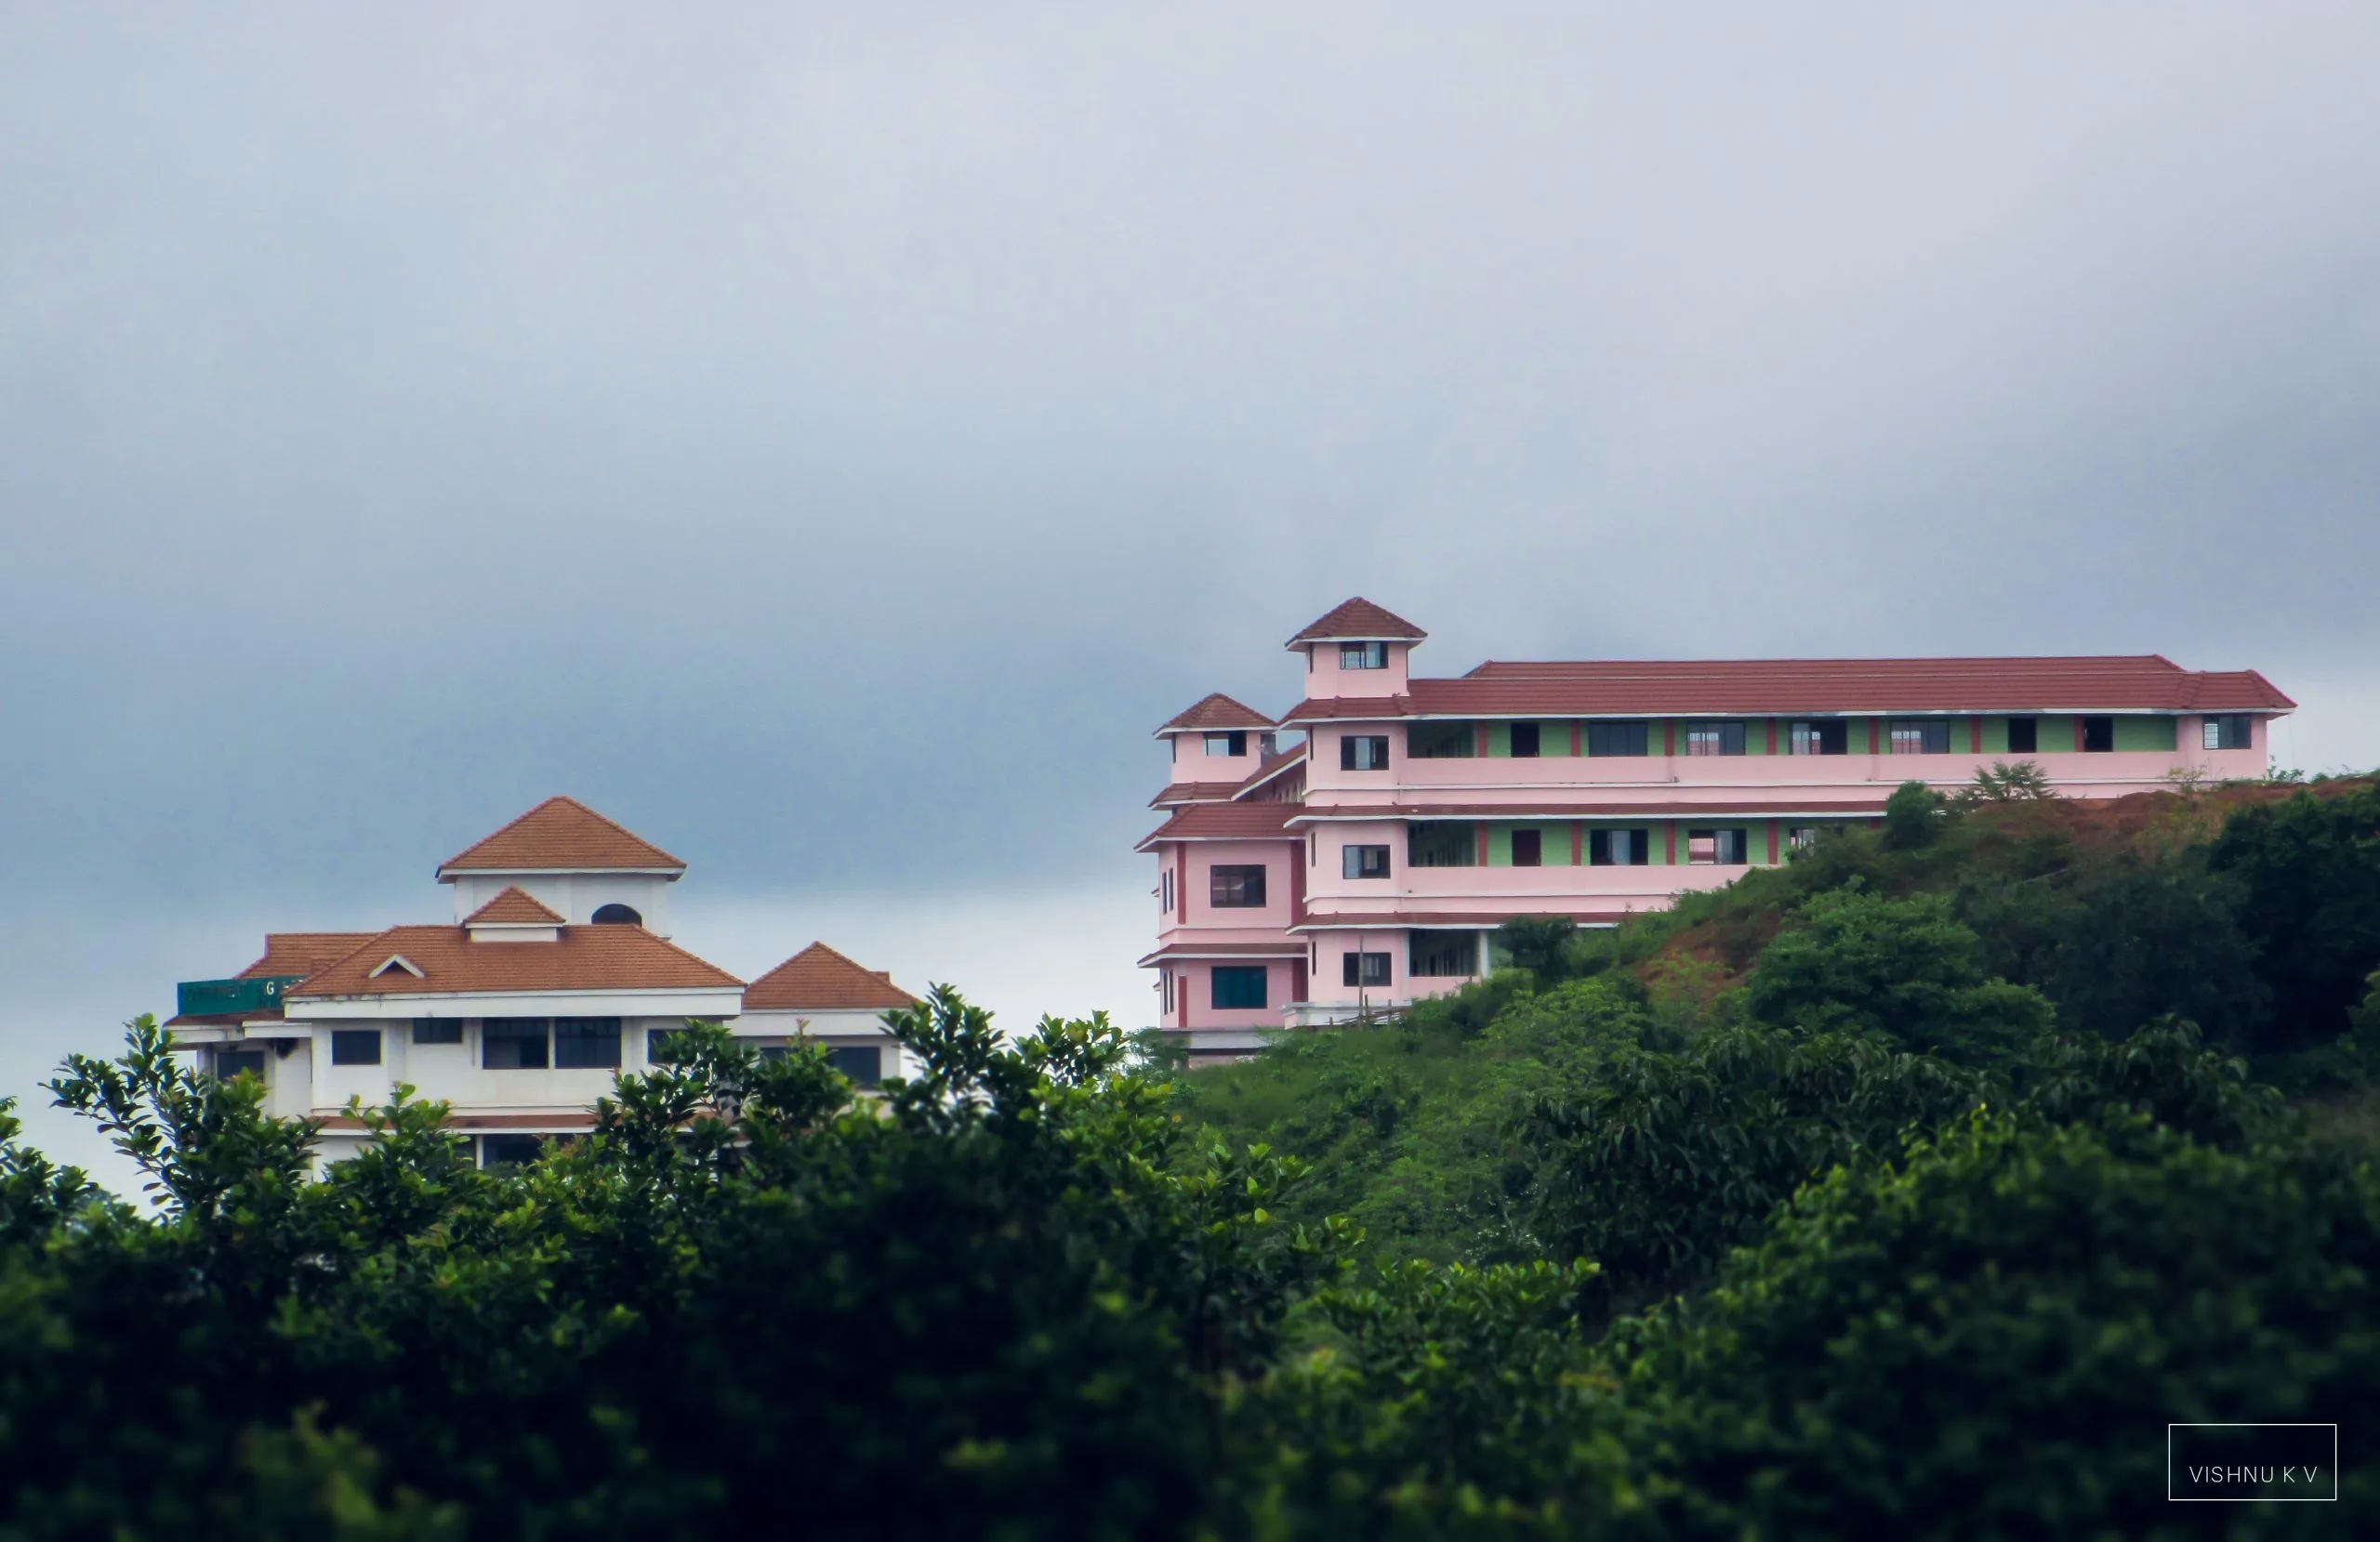 Government Engineering College, Wayanad: Admissions, Courses Offered, Fees, Placements, Rankings, Facilities